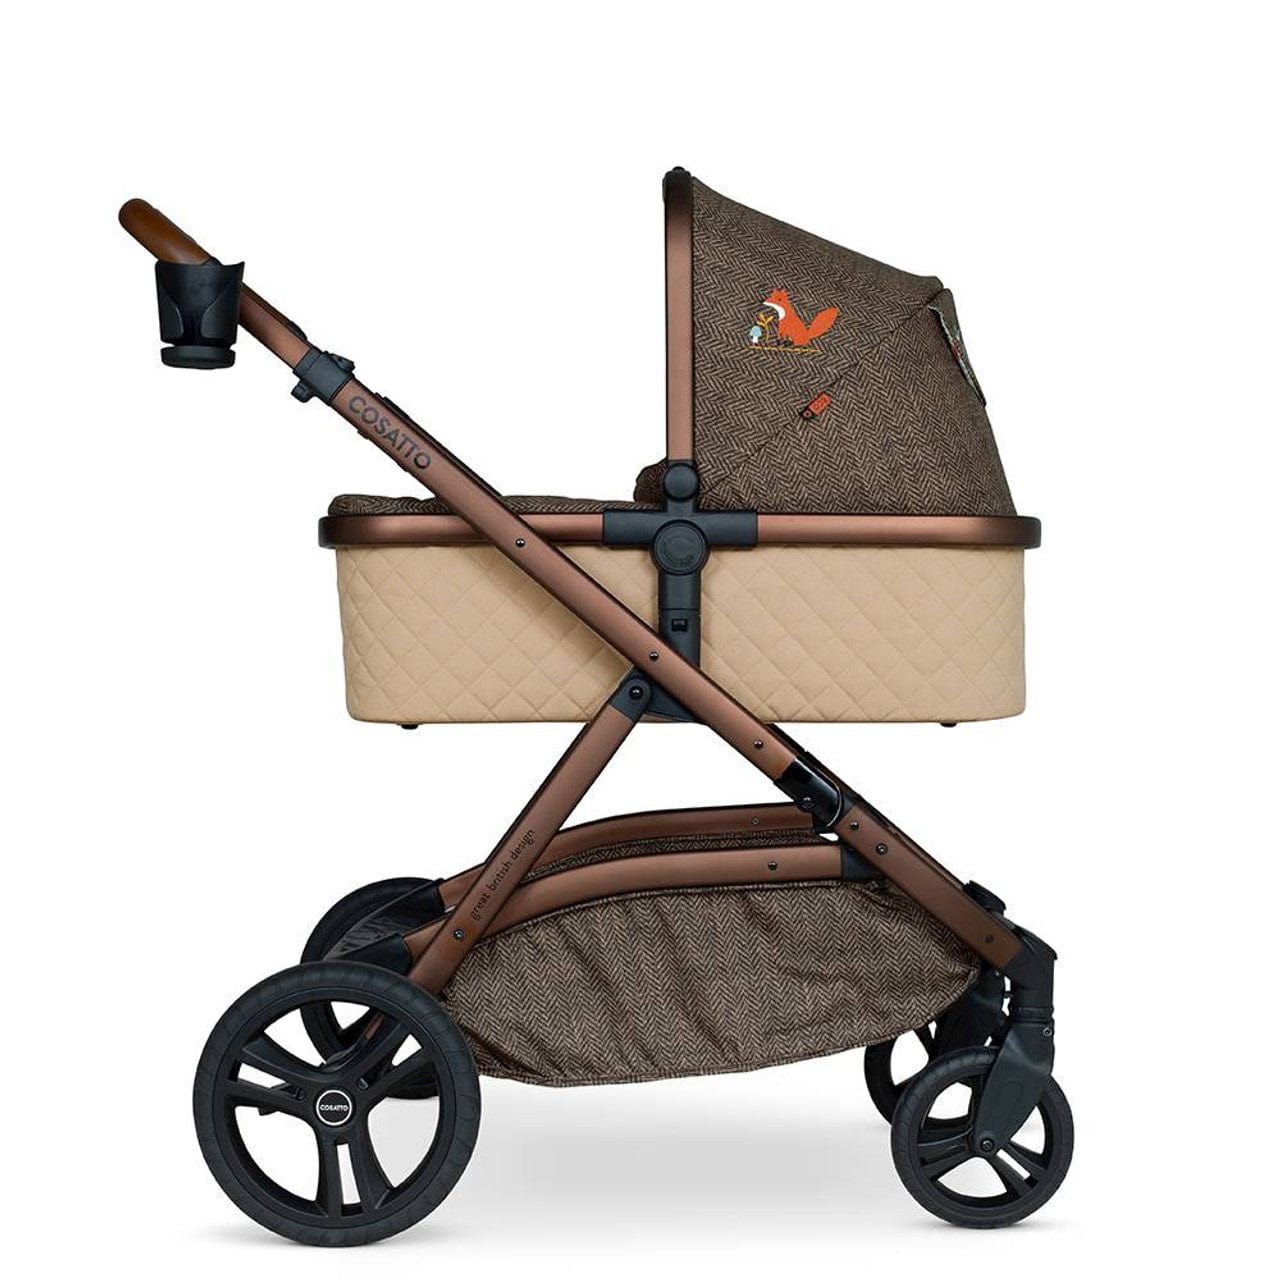 Cosatto travel systems Cosatto Wow XL Twin Travel System in Foxford Hall CT5789